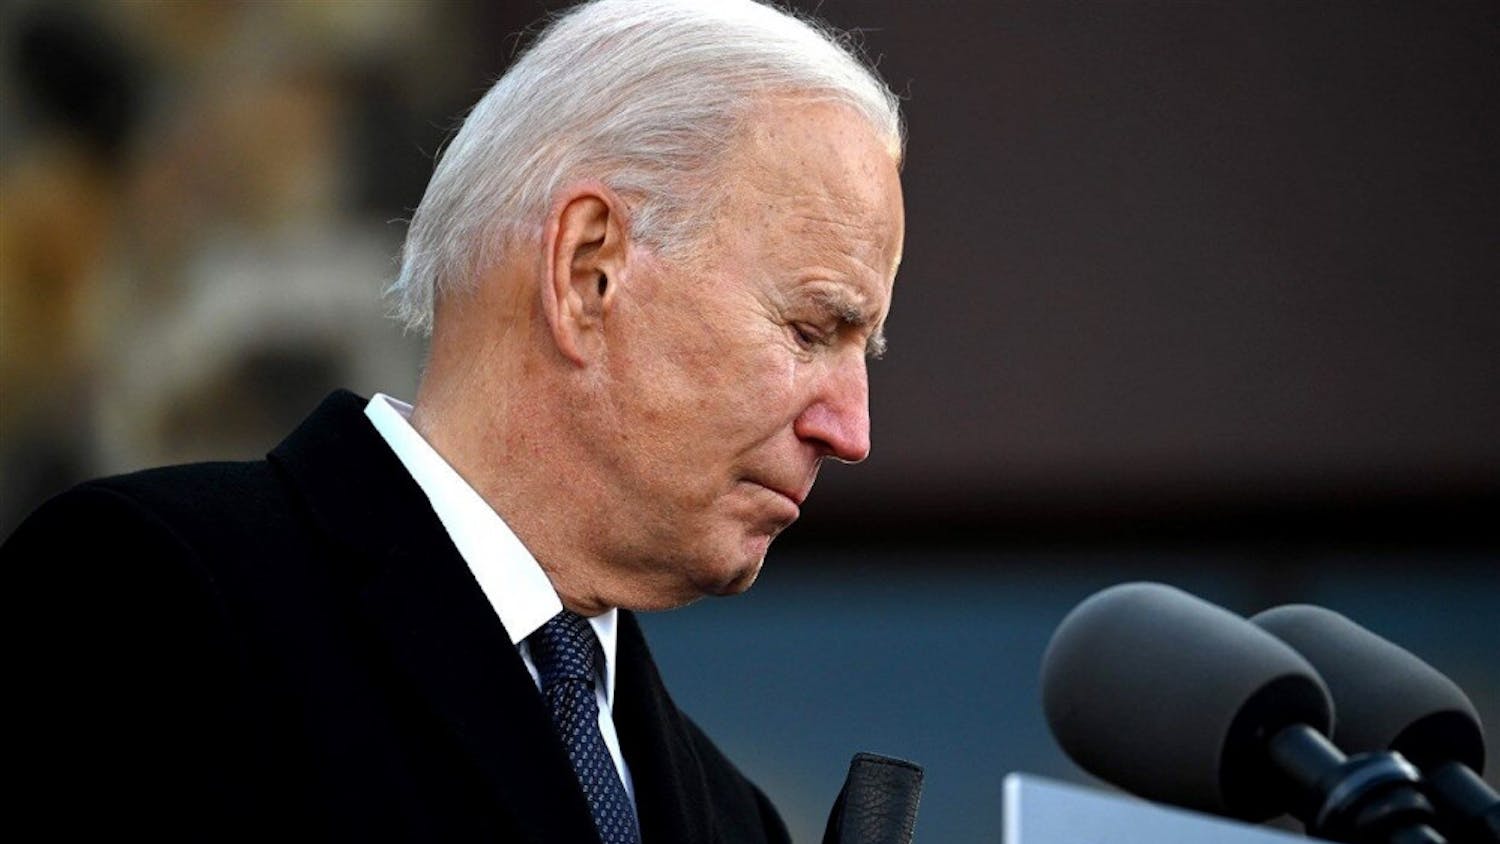 Biden crying pic (A President's Tears story)